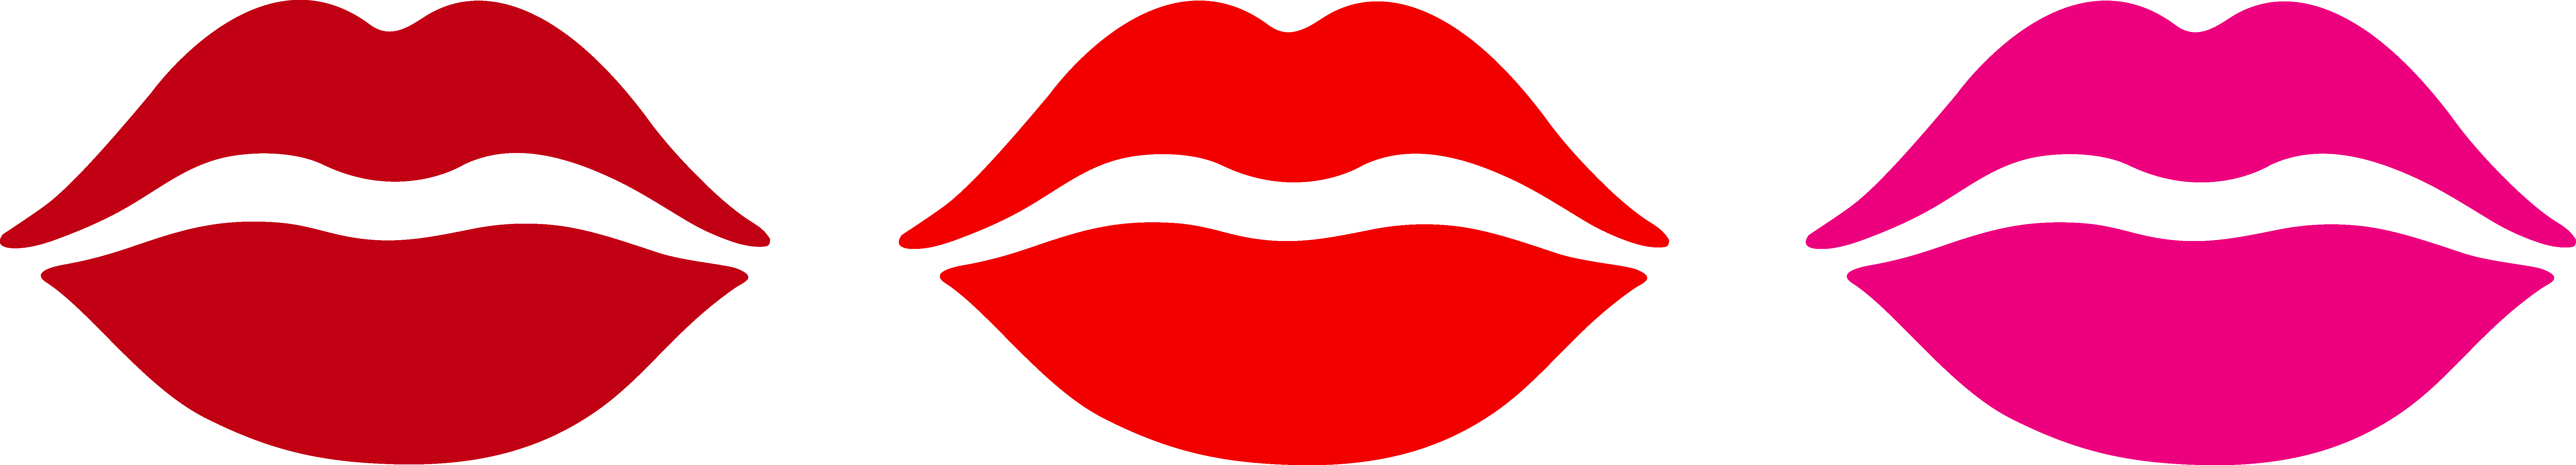 Free Kissing Lips Clipart, Download Free Clip Art, Free Clip.